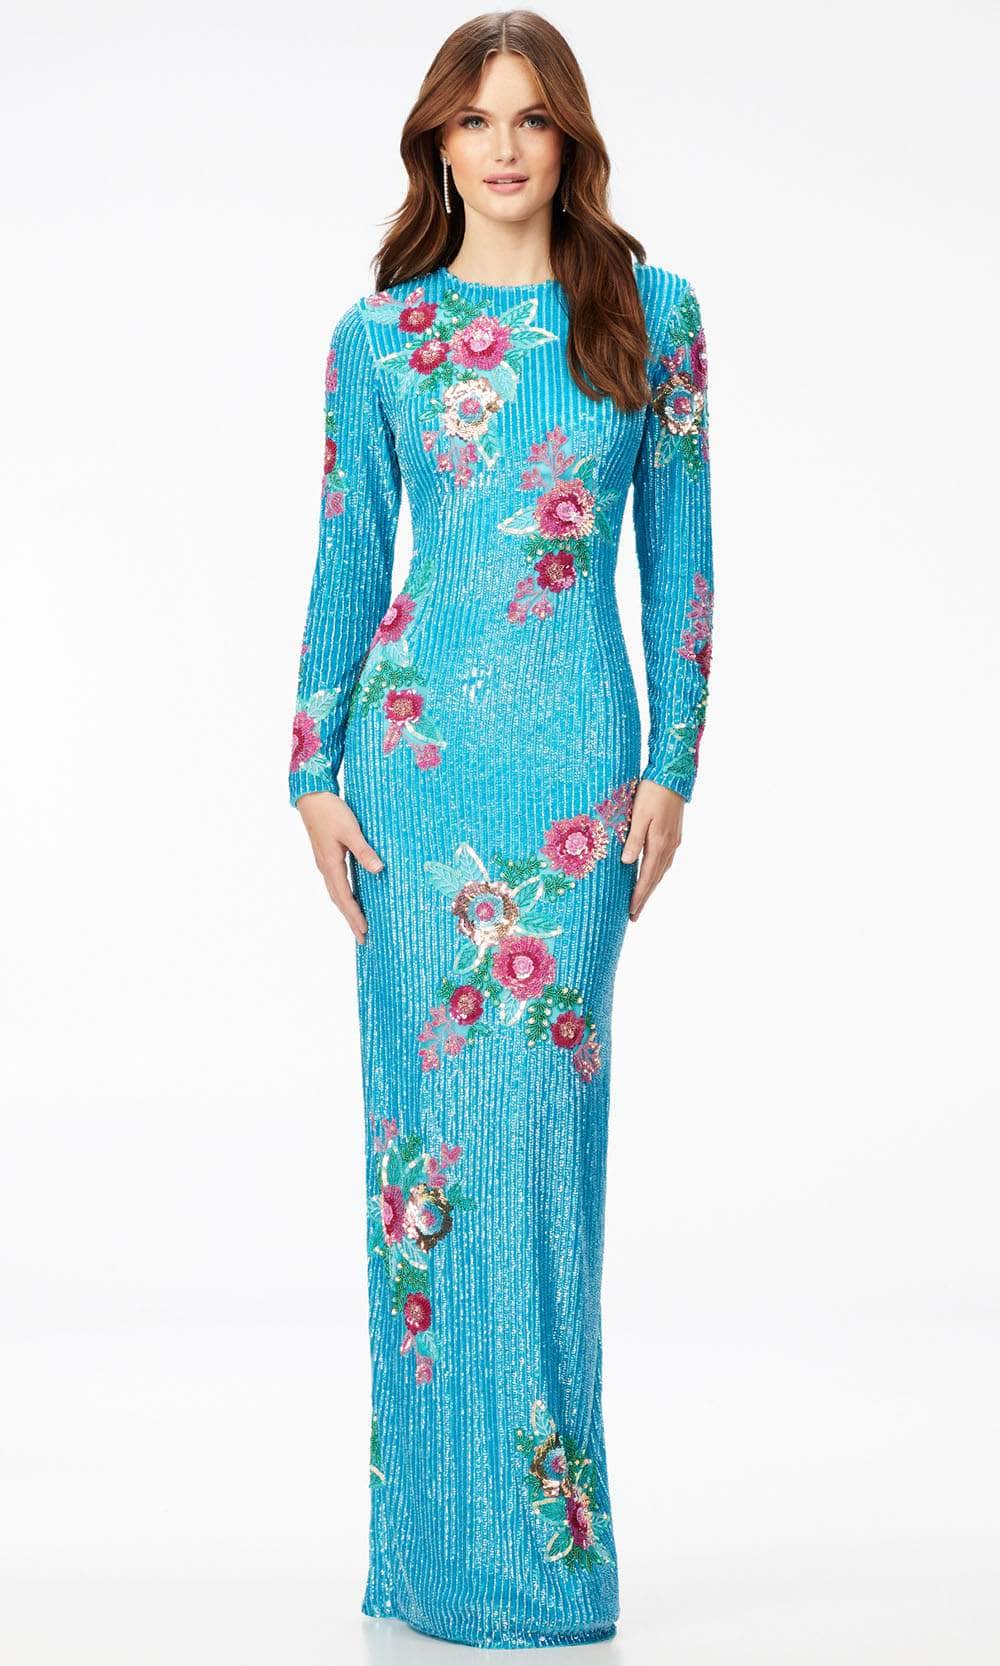 Ashley Lauren 11203 - Beaded Floral Evening Dress Special Occasion Dress 0 / Neon Blue